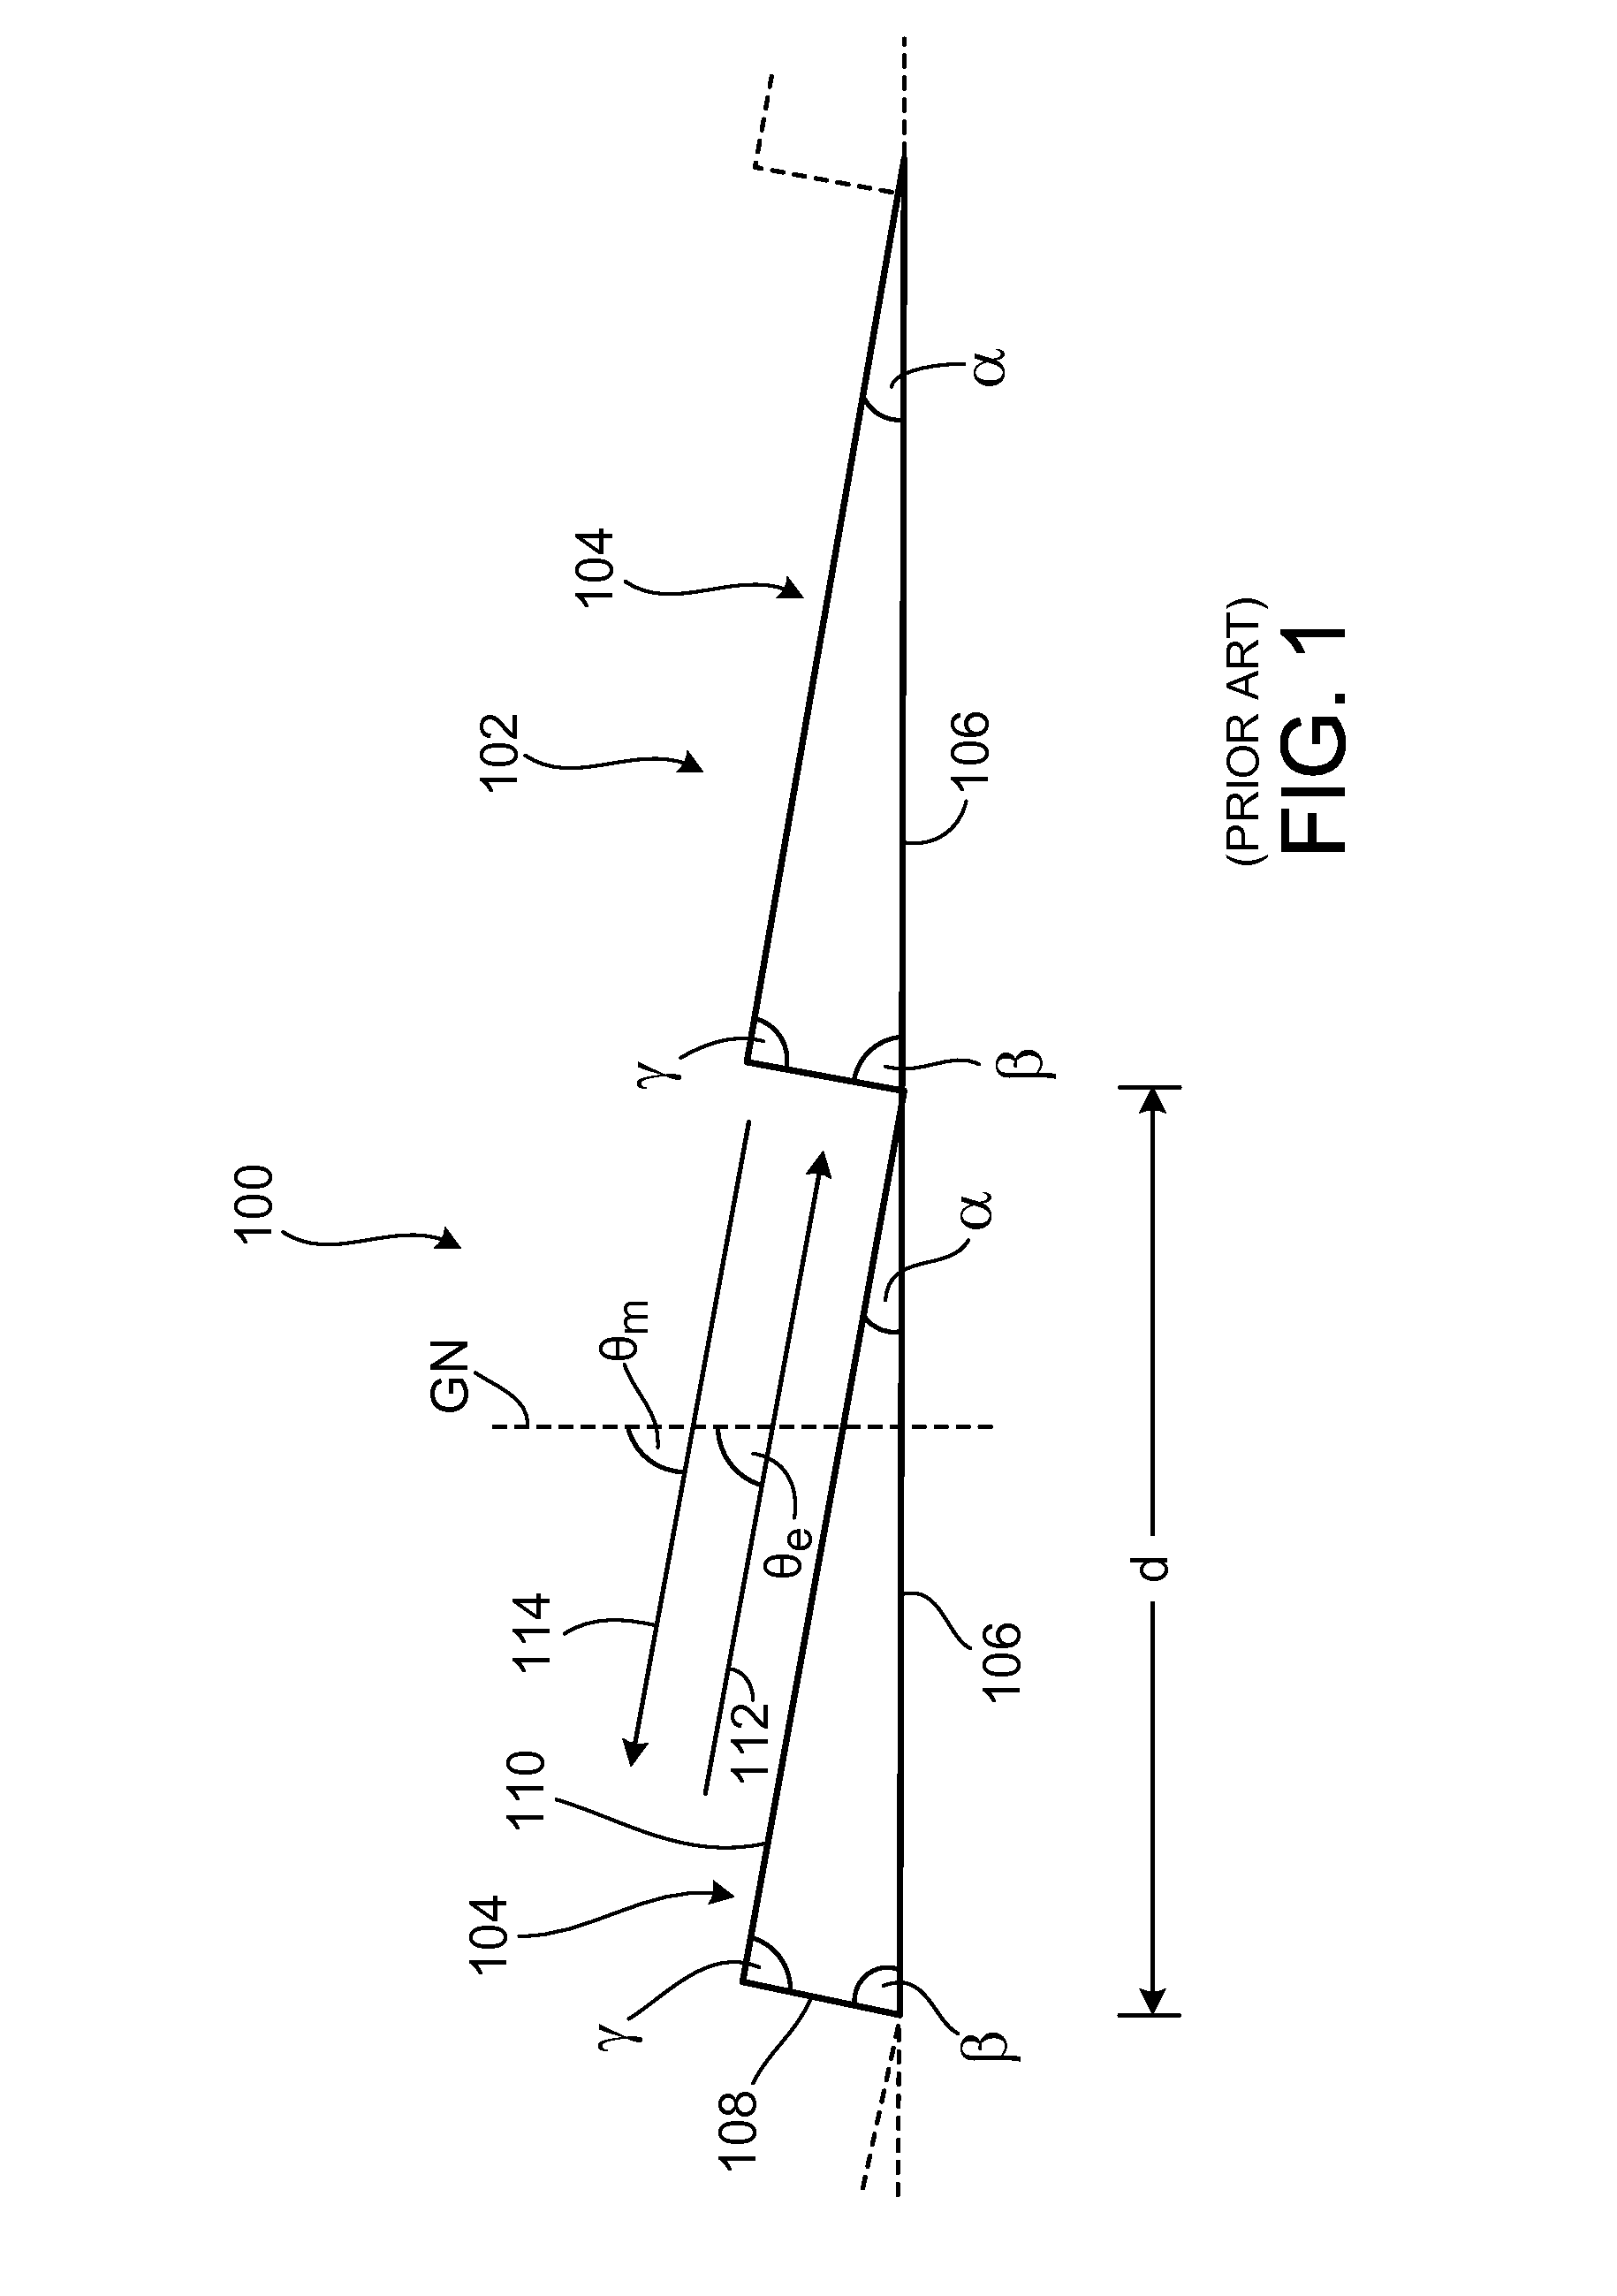 Optical arrangement, method of use, and method for determining a diffraction grating